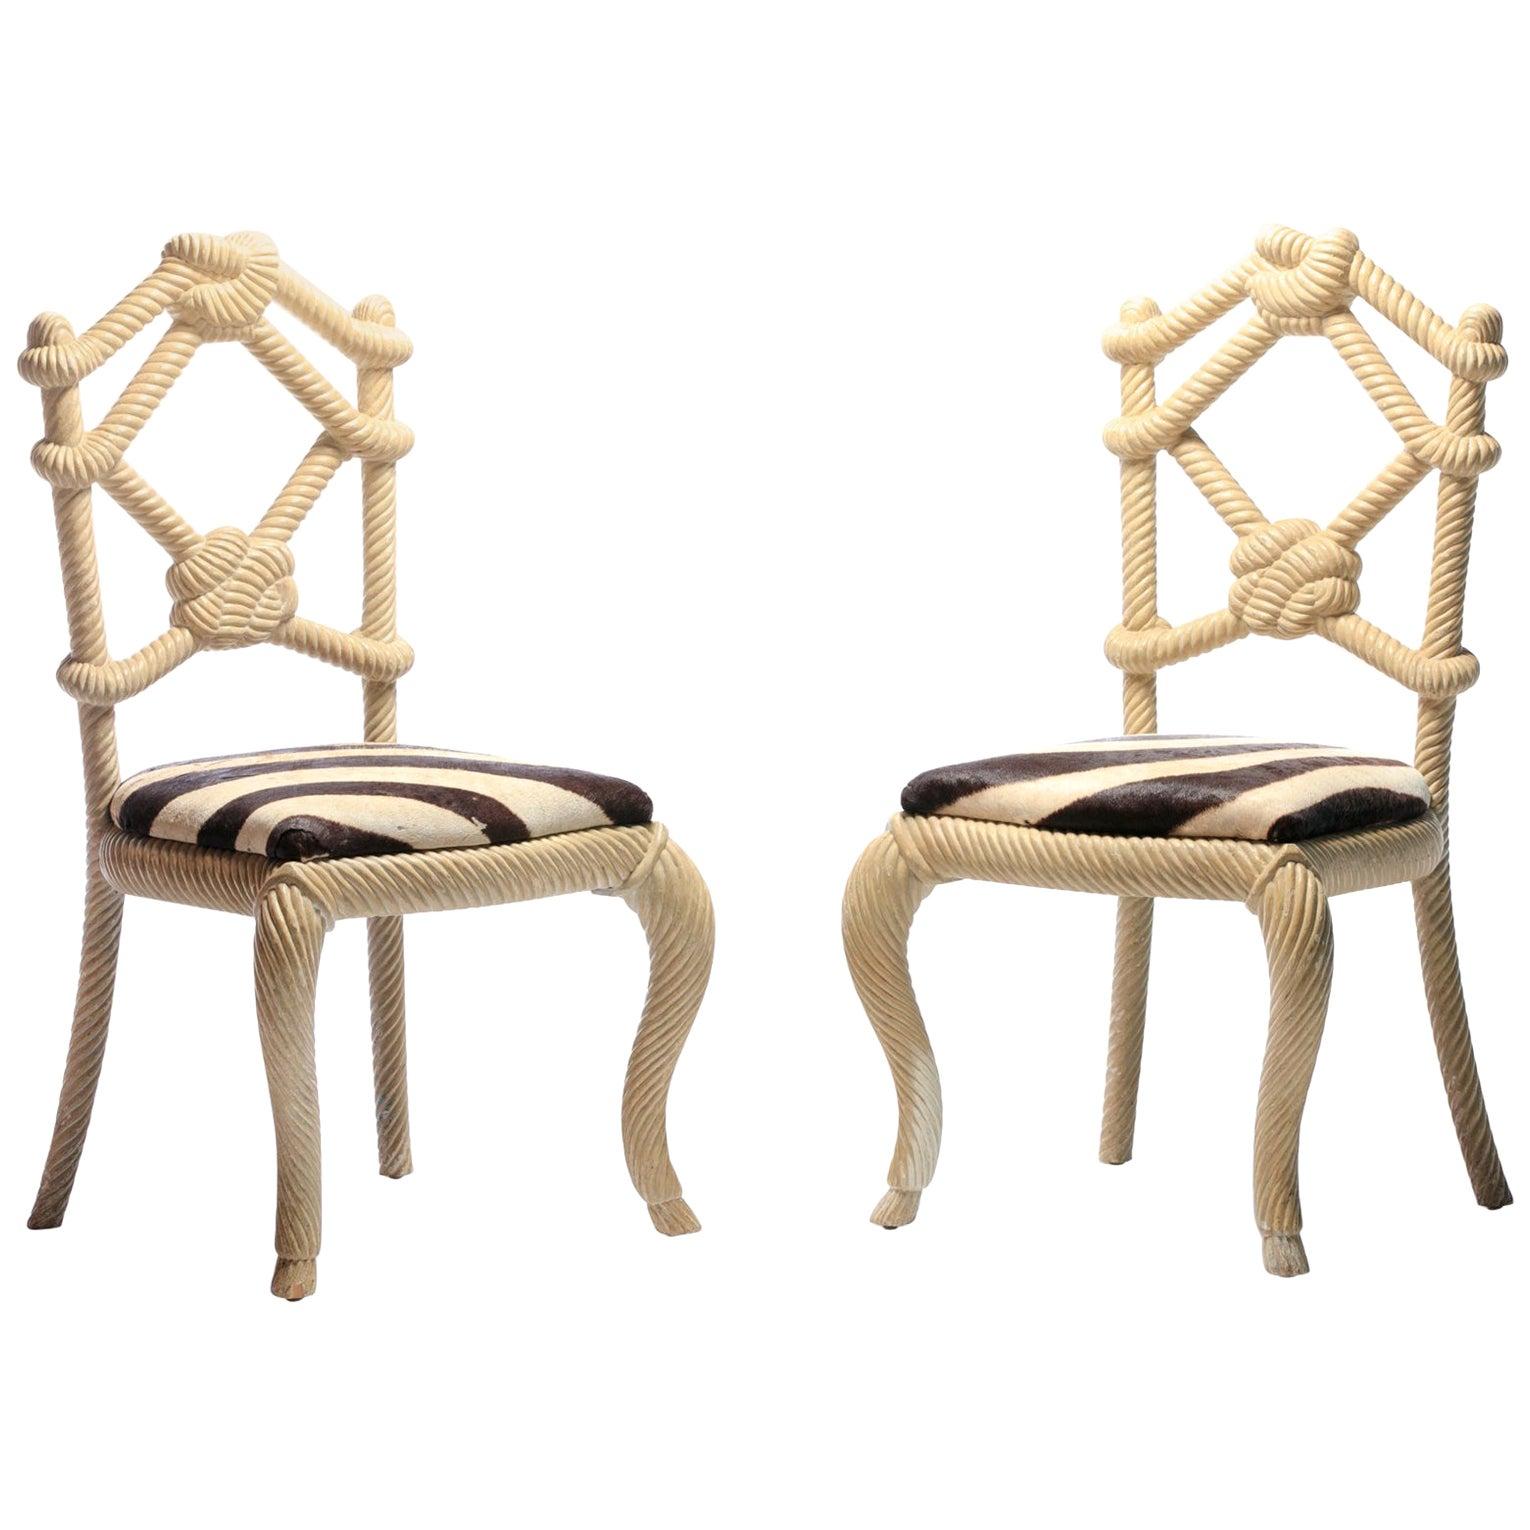 Pair of Rope Chairs from Viceroy Miami with Zebra Hide Upholstered Seats For Sale